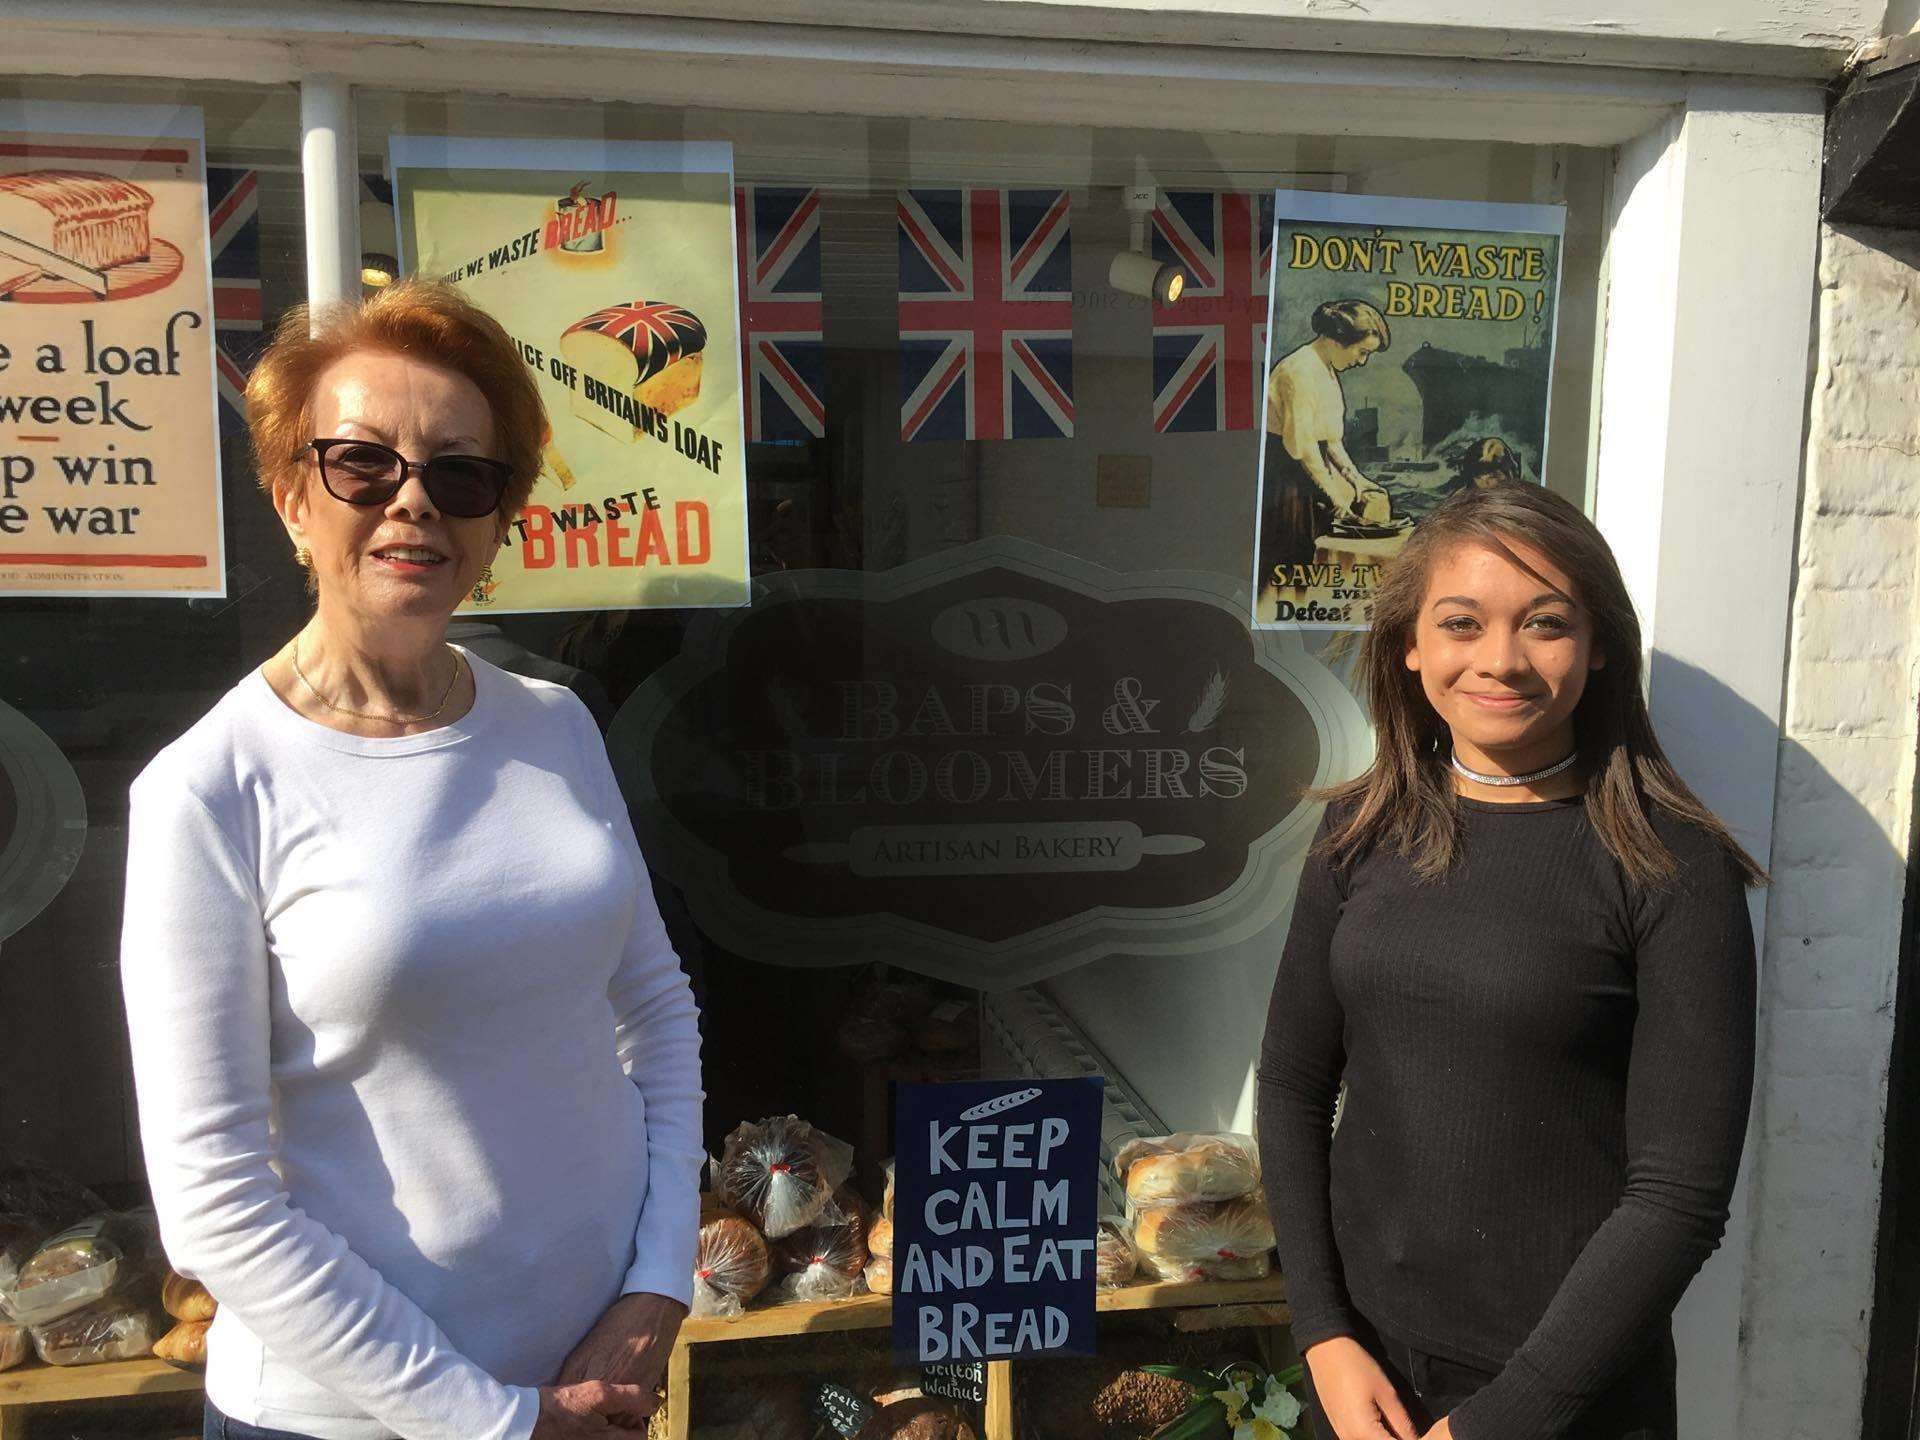 Cllr Veronica Liote, who organised Sandwich Food Fayre, is pictured with Danielle Usherwood from Baps and Bloomers